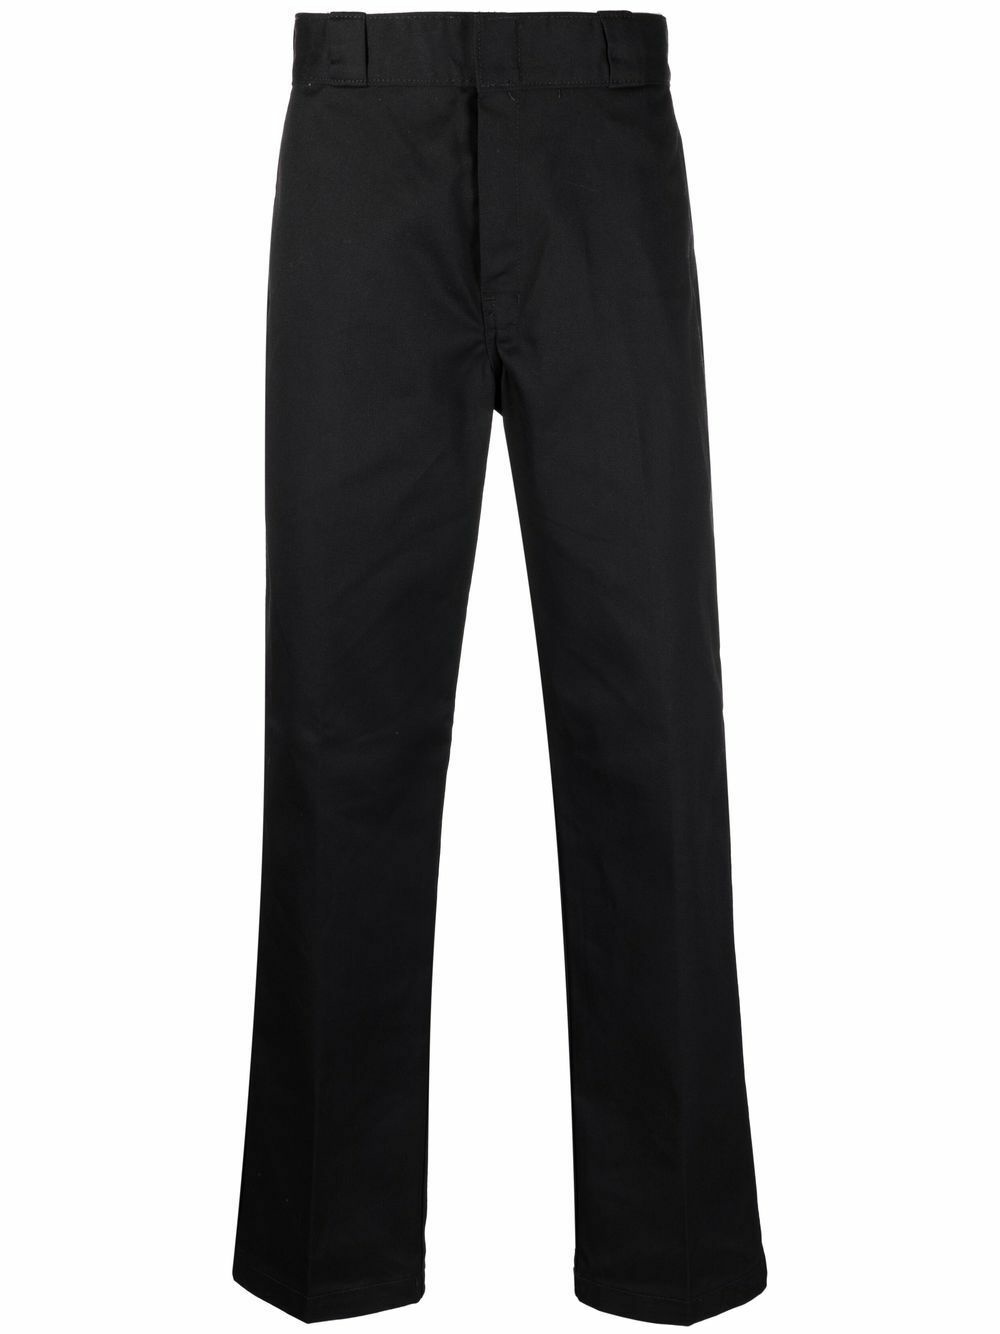 DICKIES CONSTRUCT - Striaght-leg Cotton Blend Trousers Dickies Construct